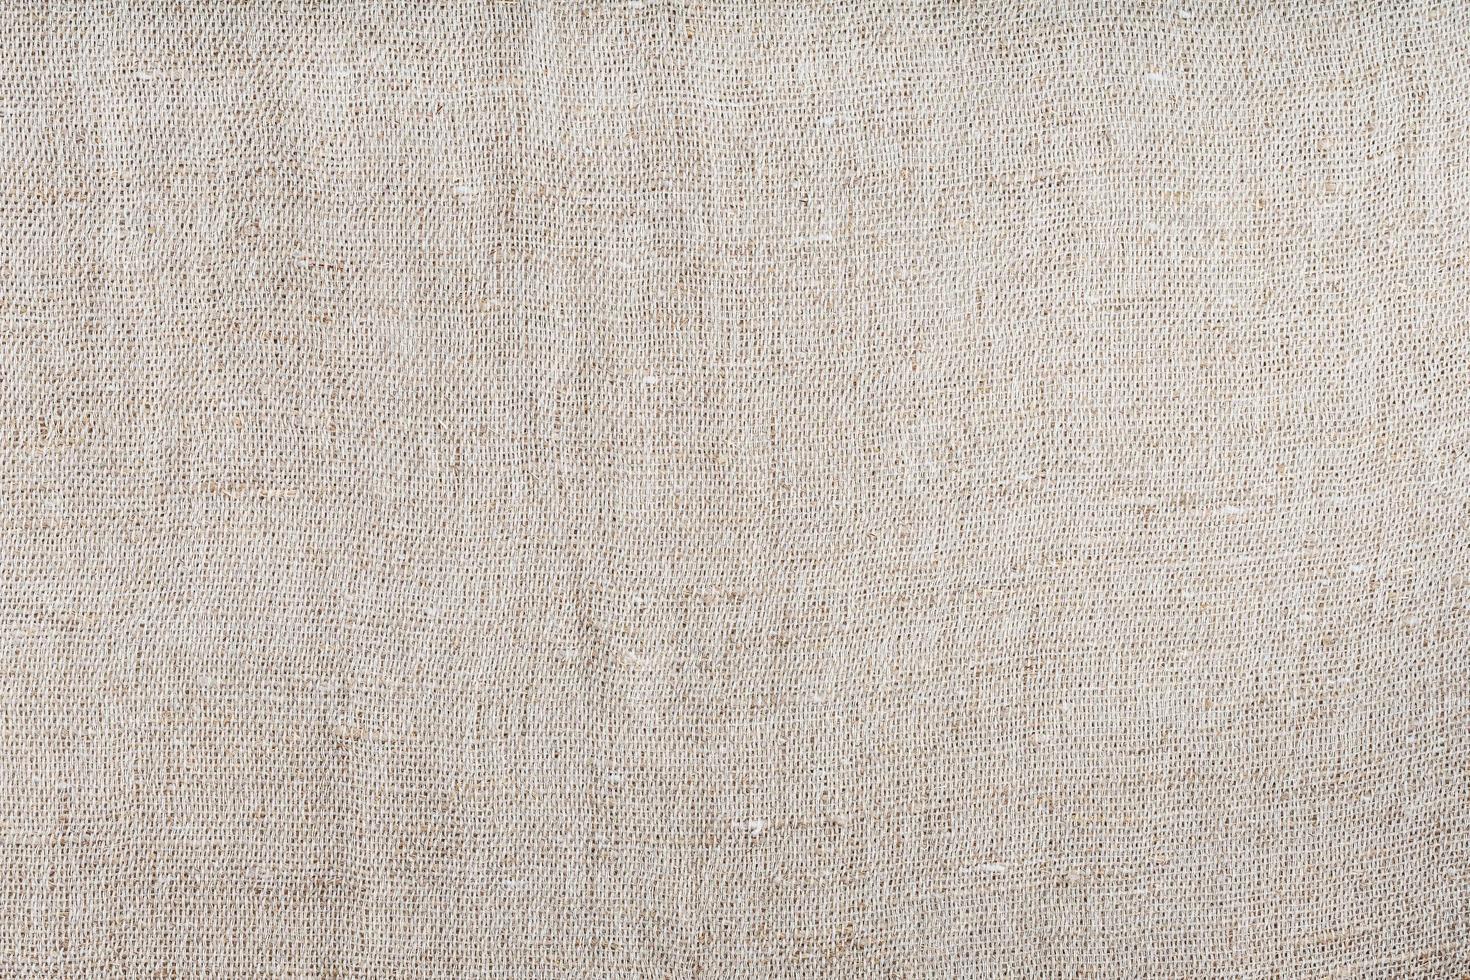 Textured background of fabric from burlap fibers with fibers in full screen photo